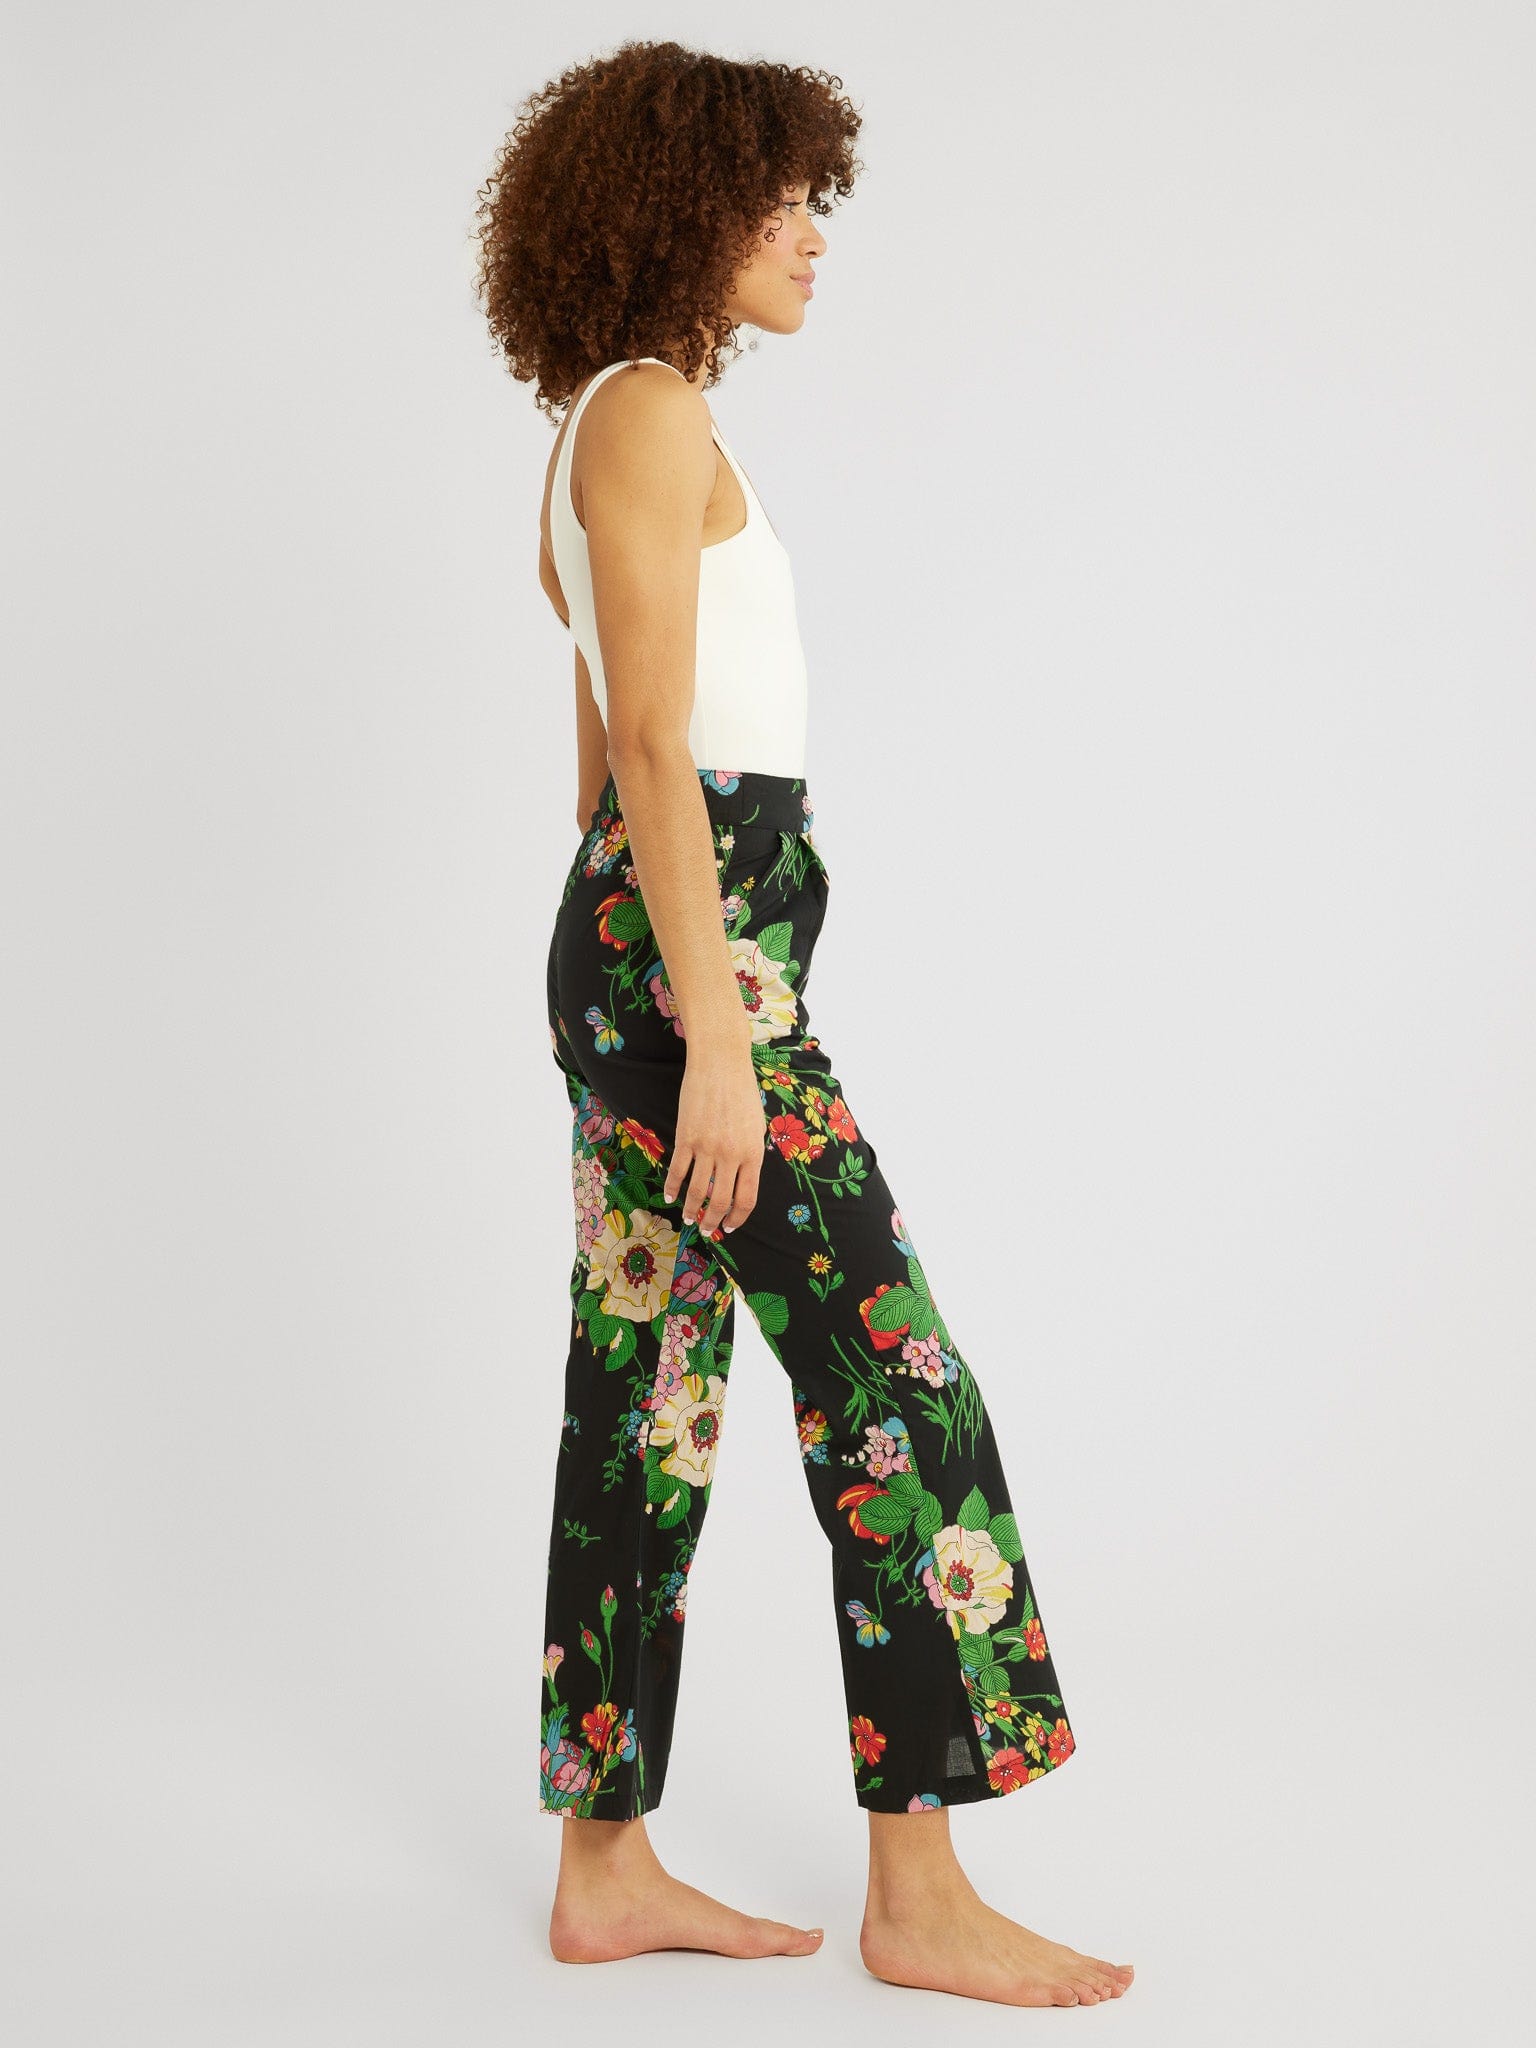 MILLE Clothing Anita Pant in Finale